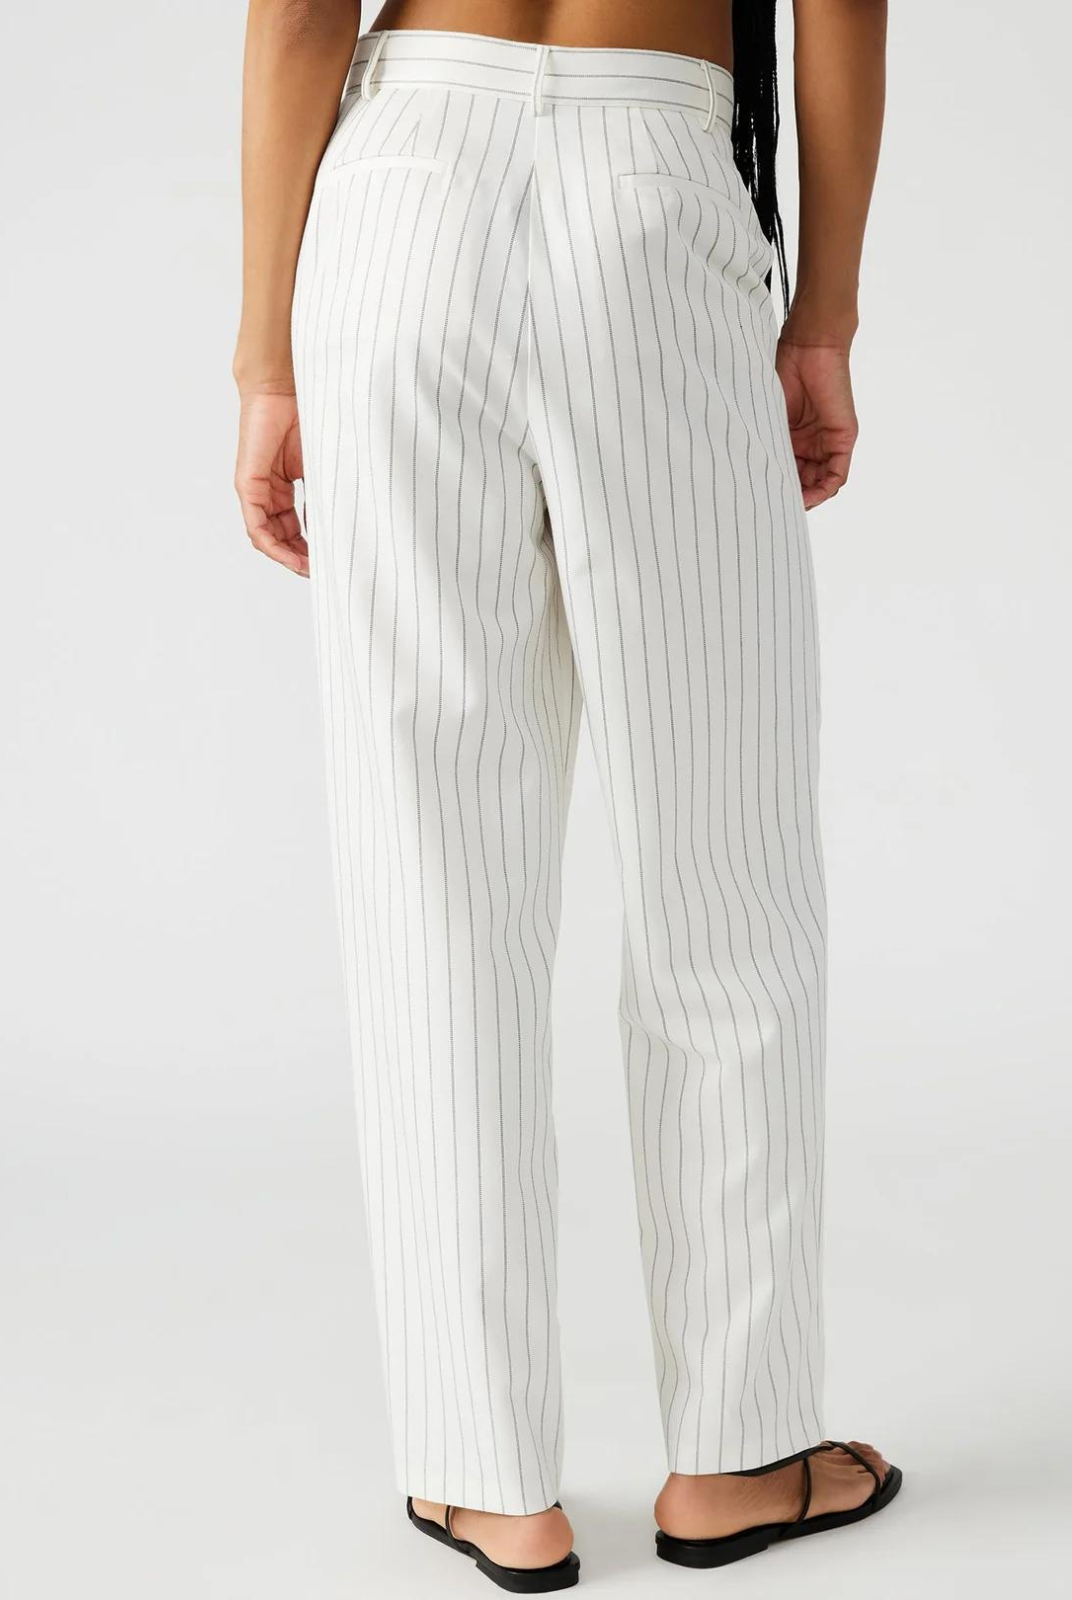 Steve Madden Rumi Pant.Elevate your spring wardrobe with the Rumi pant. These pinstripe suiting trousers are menswear inspired and feature a tapered design and pleated detailing. These trousers offer a sophisticated and polished look for any occasion.